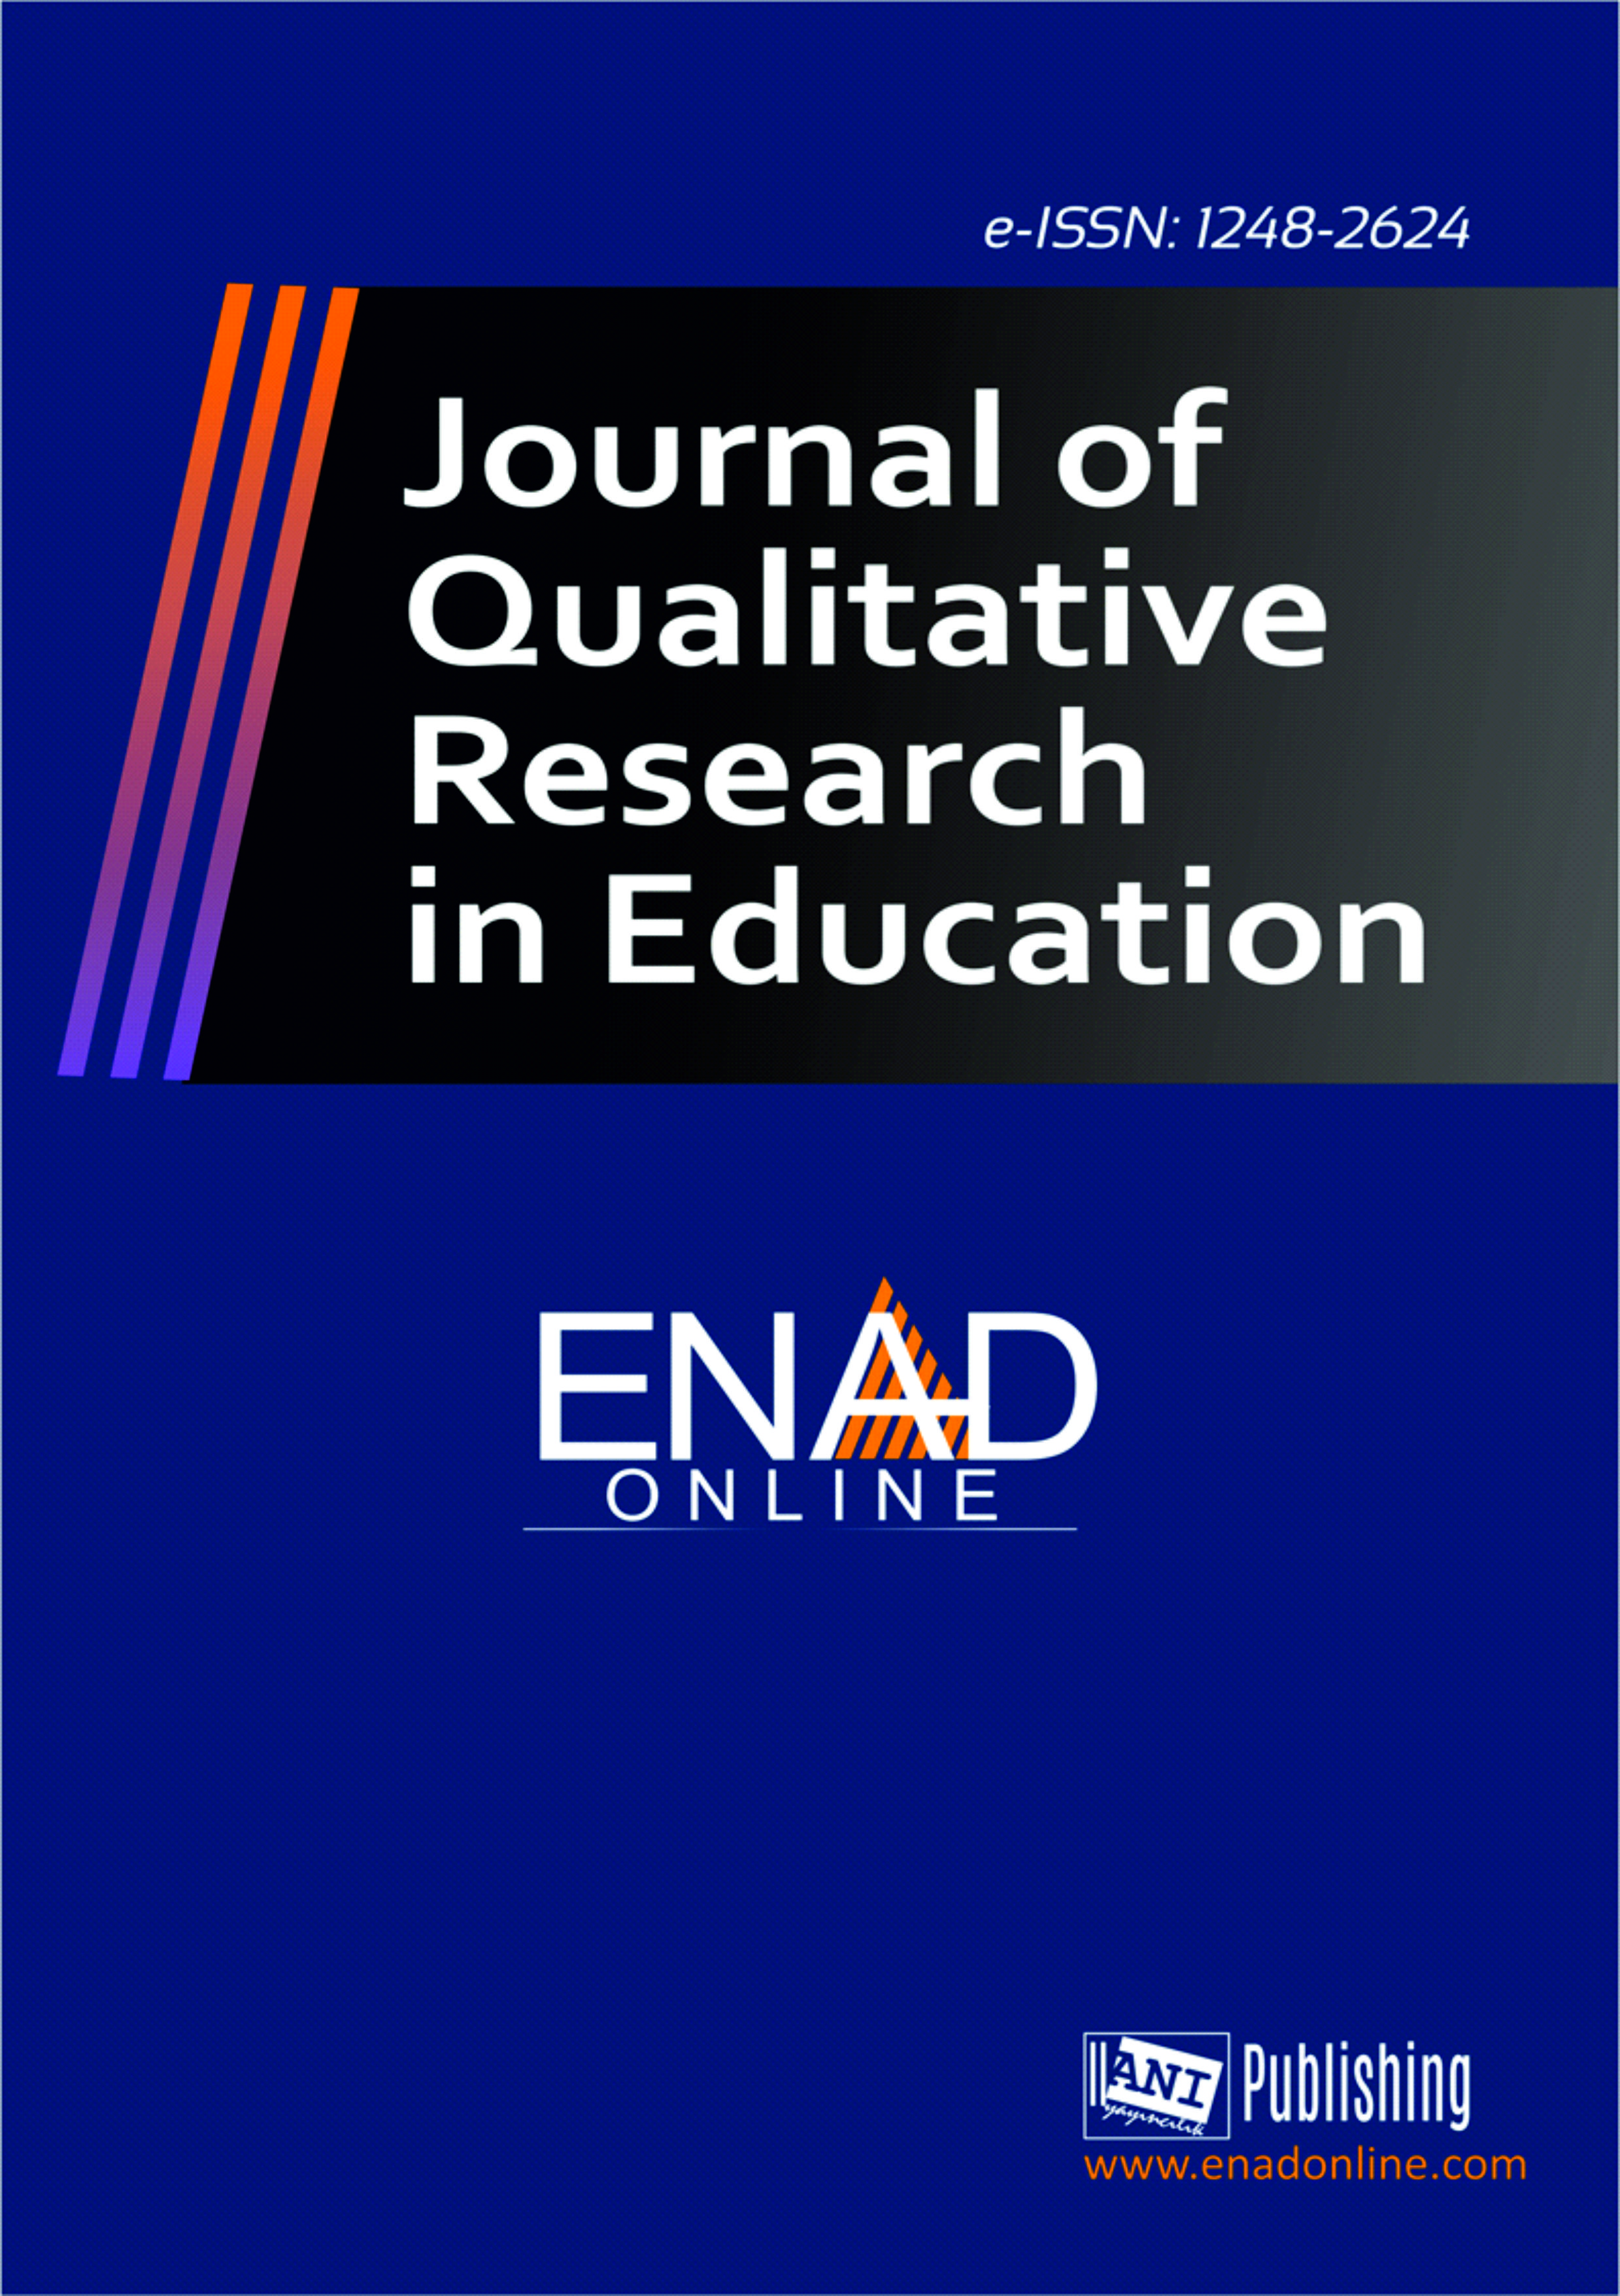 					View Issue 32 (2022): Journal of Qualitative Research in Education
				